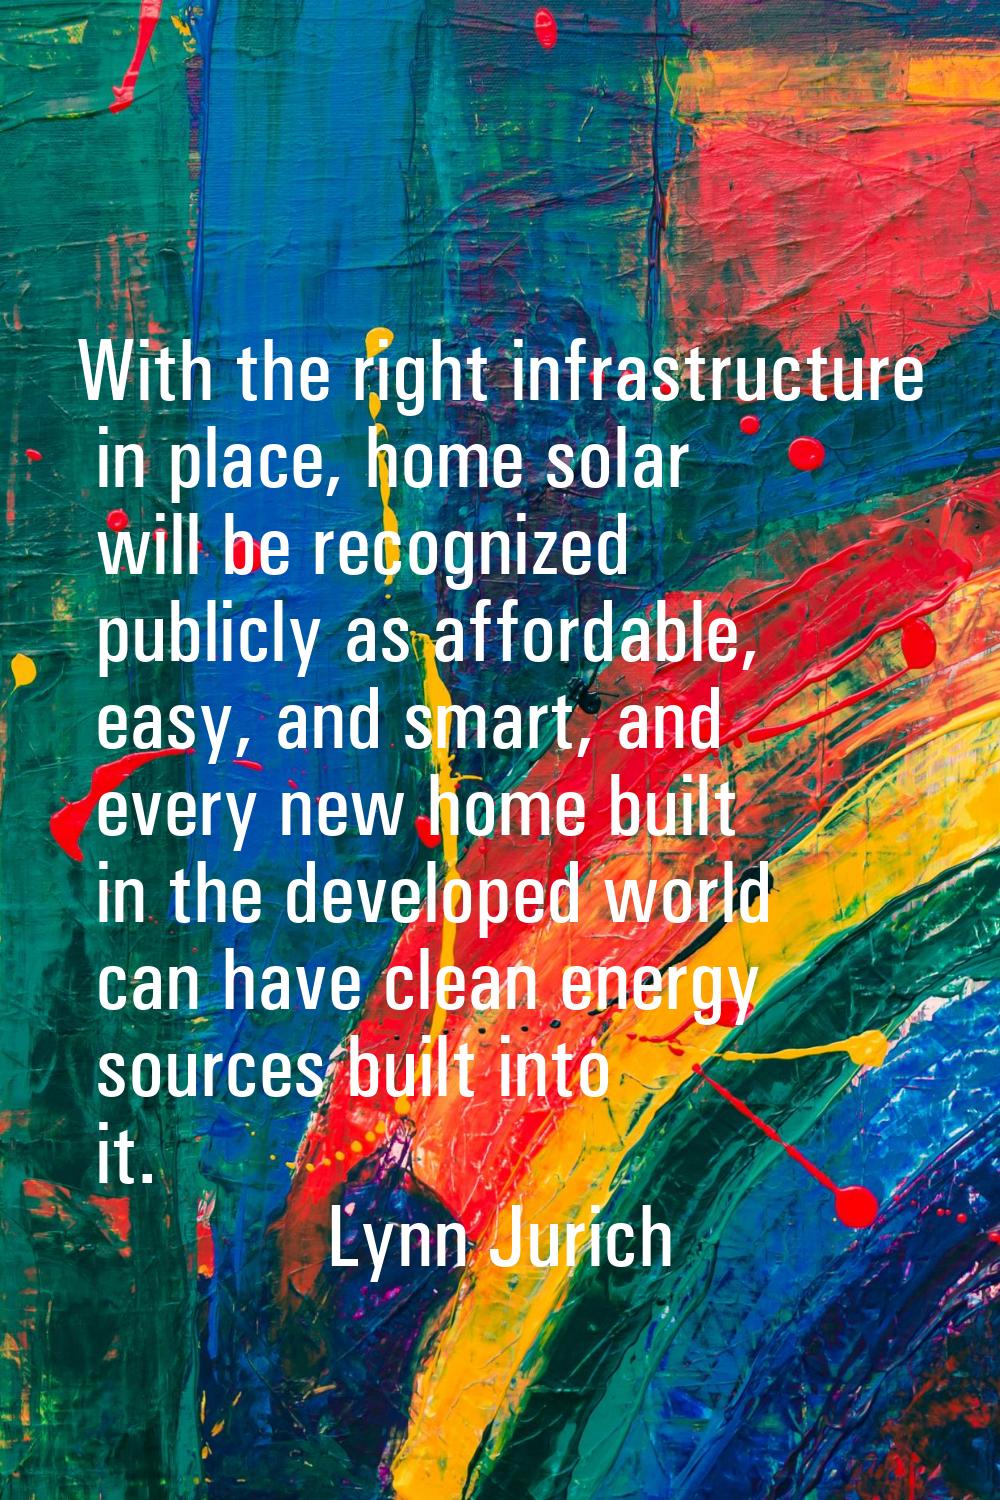 With the right infrastructure in place, home solar will be recognized publicly as affordable, easy,